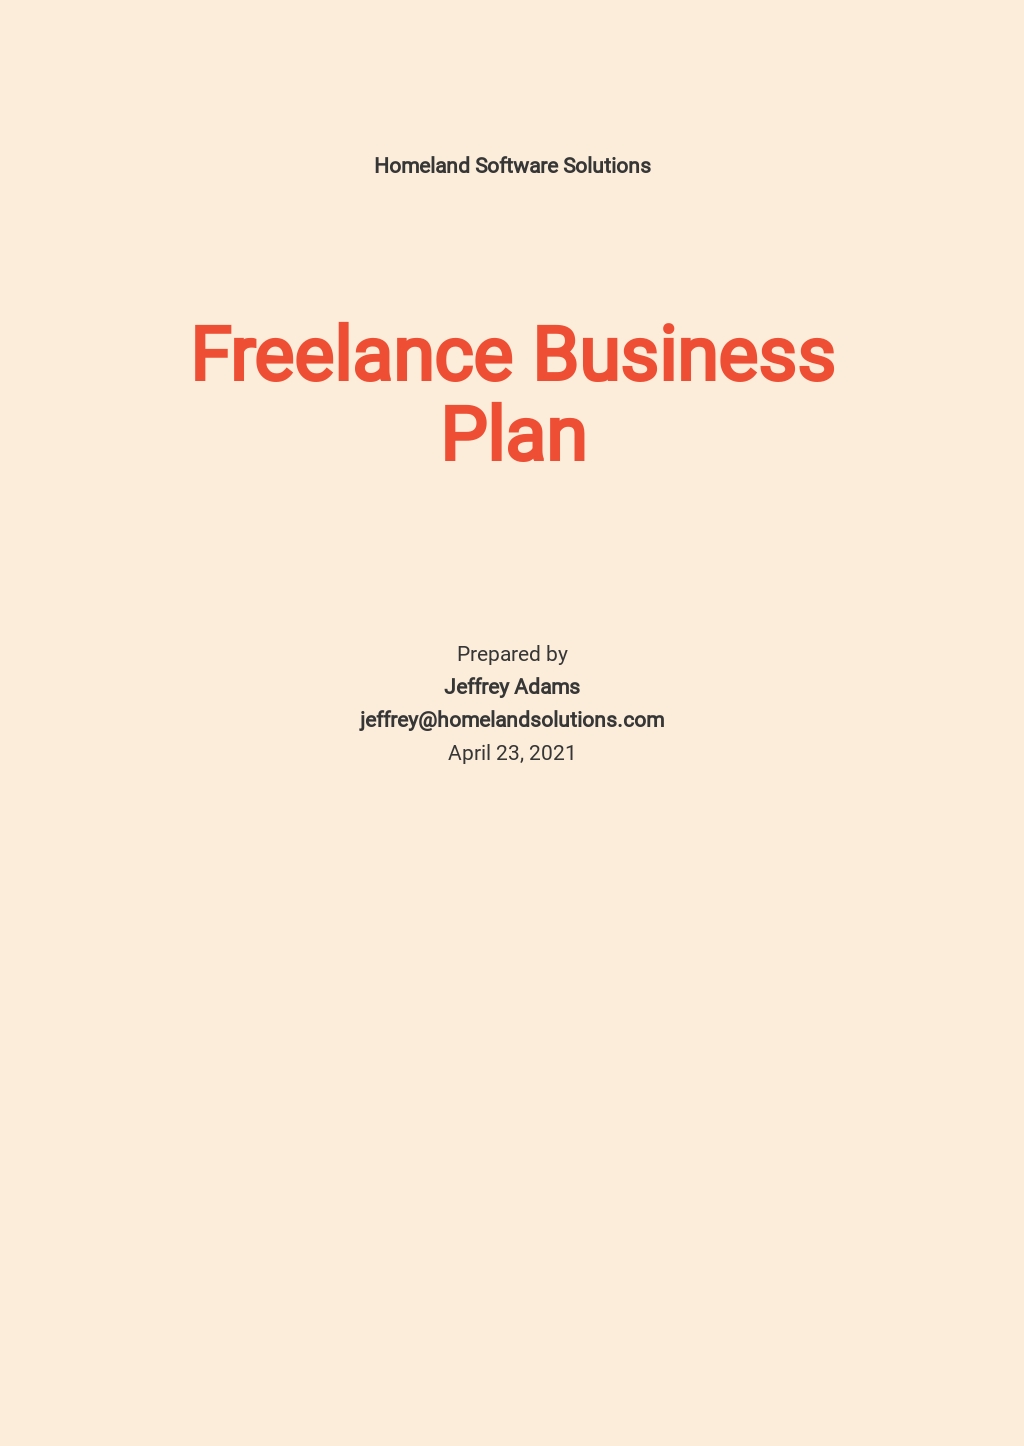 business plan consultant freelance